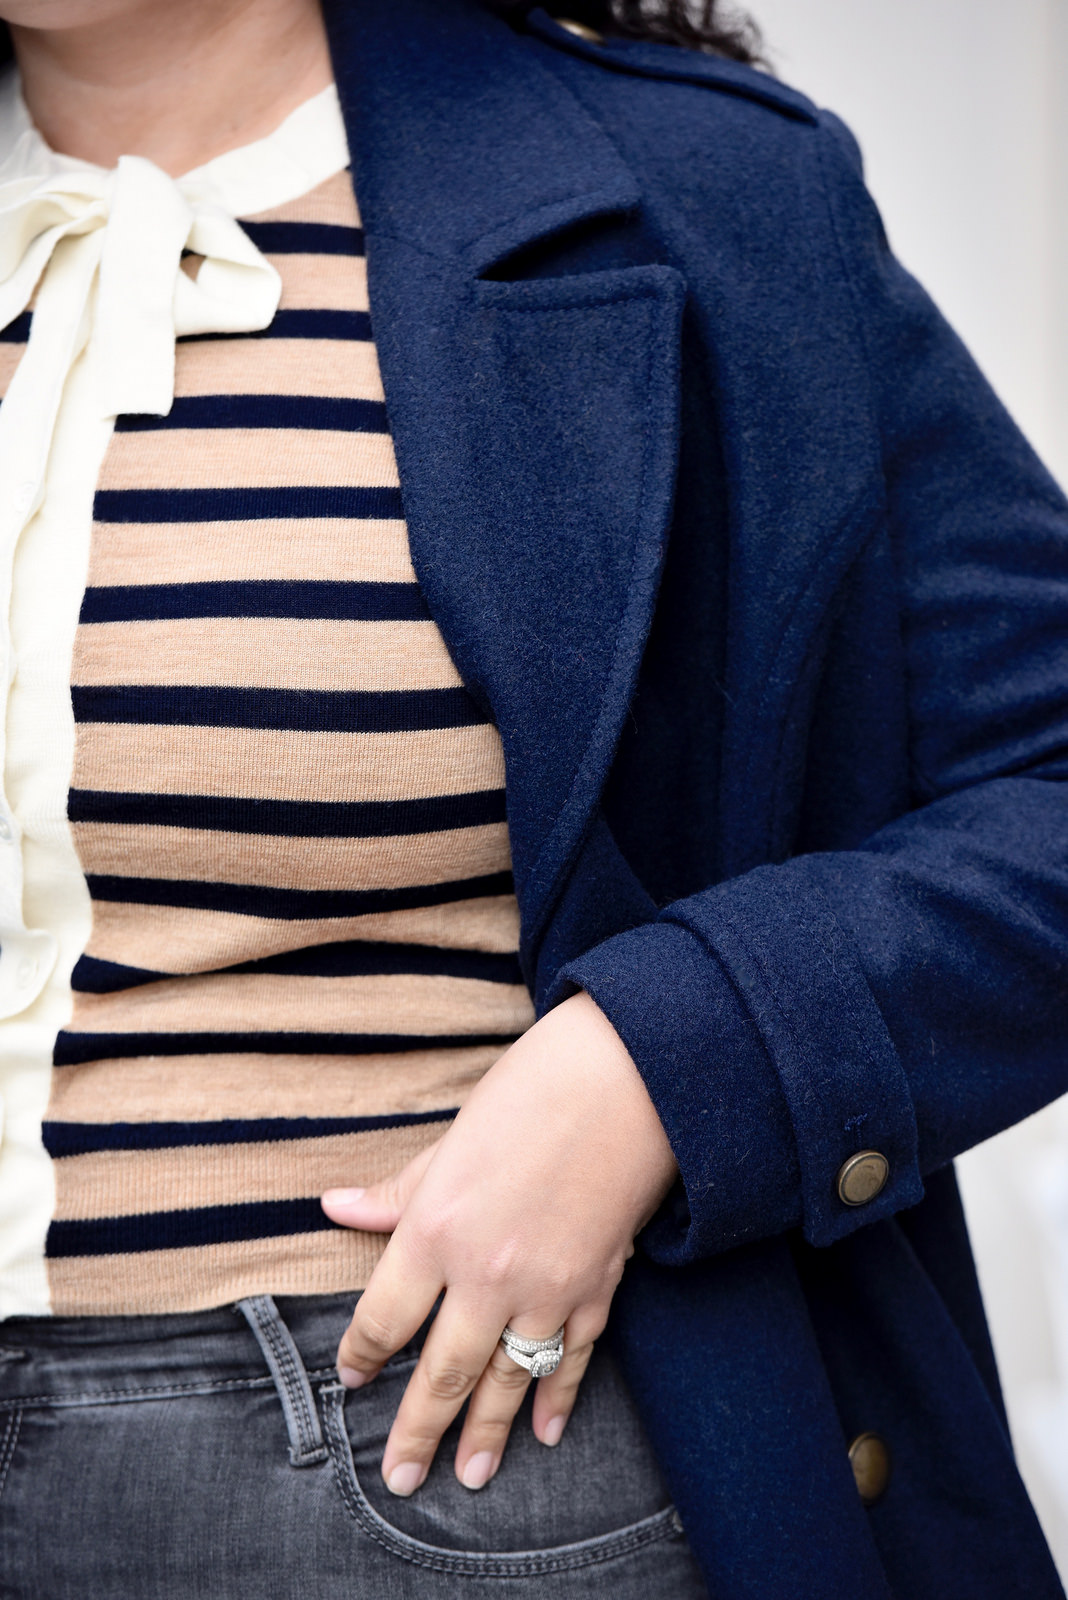 Girl With Curves featuring Navy Peacoat from Old Navy, Cardigan from J Crew, and Gray Jeans from Old Navy.